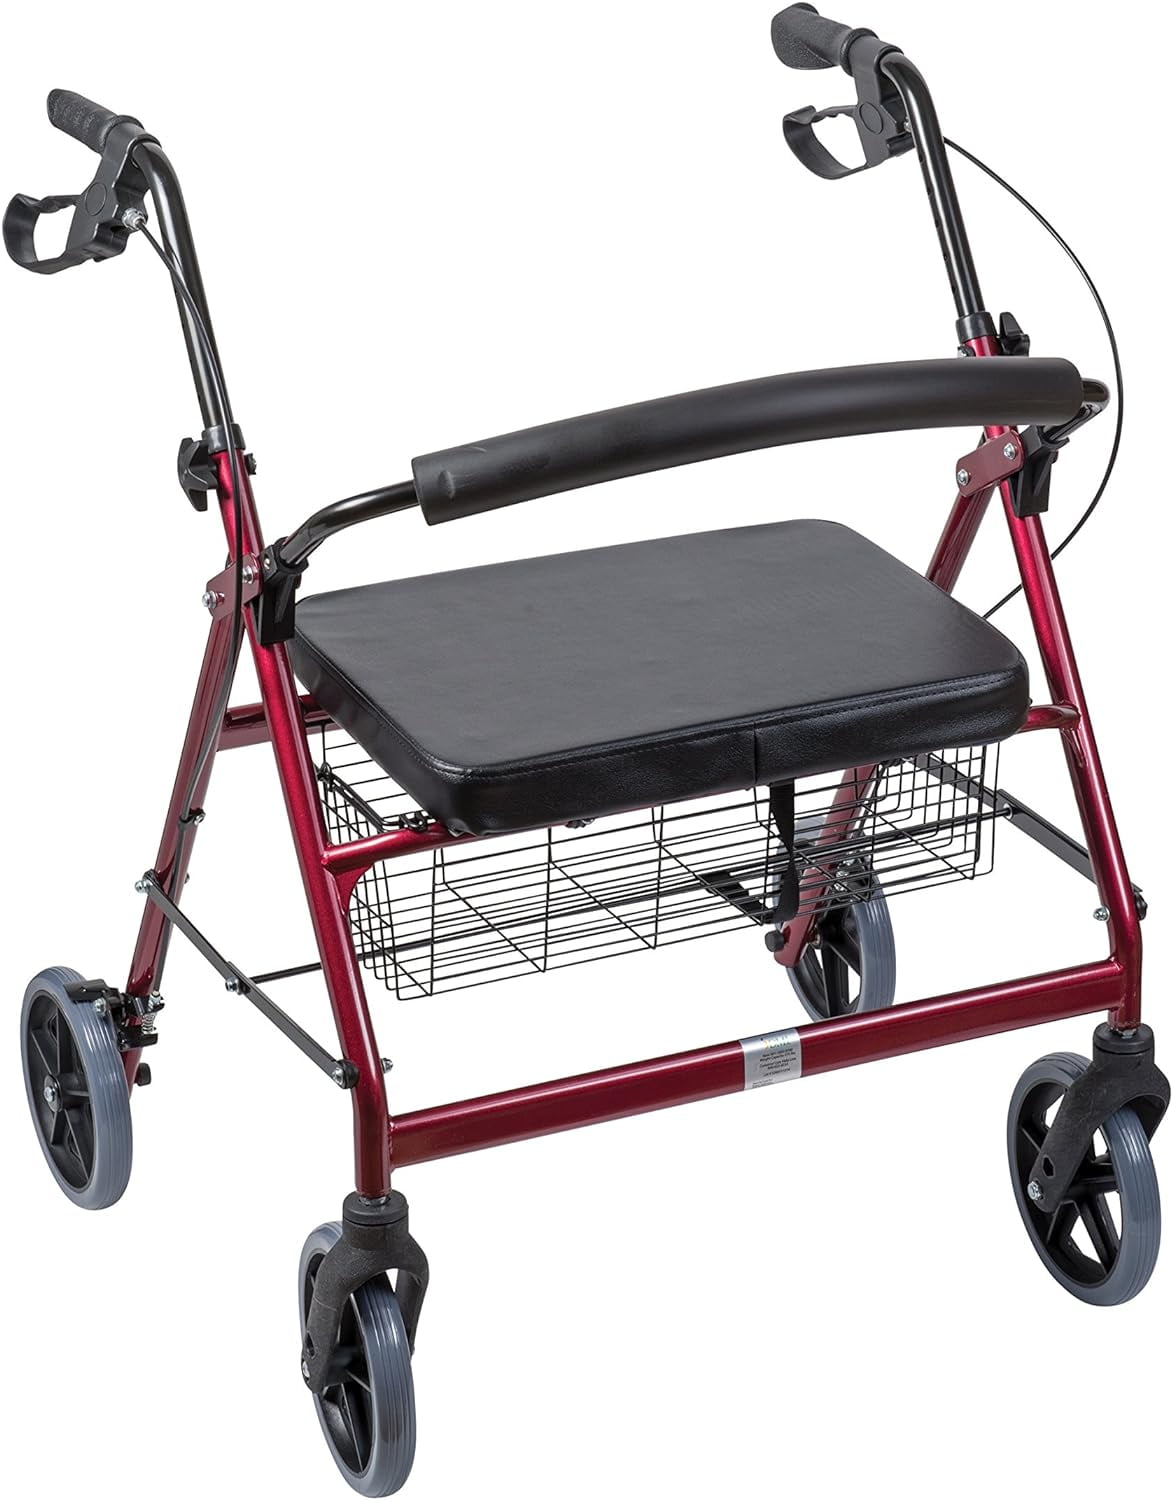 Oasisspace Heavy Duty Rollator Walker - Bariatric Rollator Walker with Large Seat for Seniors Support Up to 500 lbs (Red)